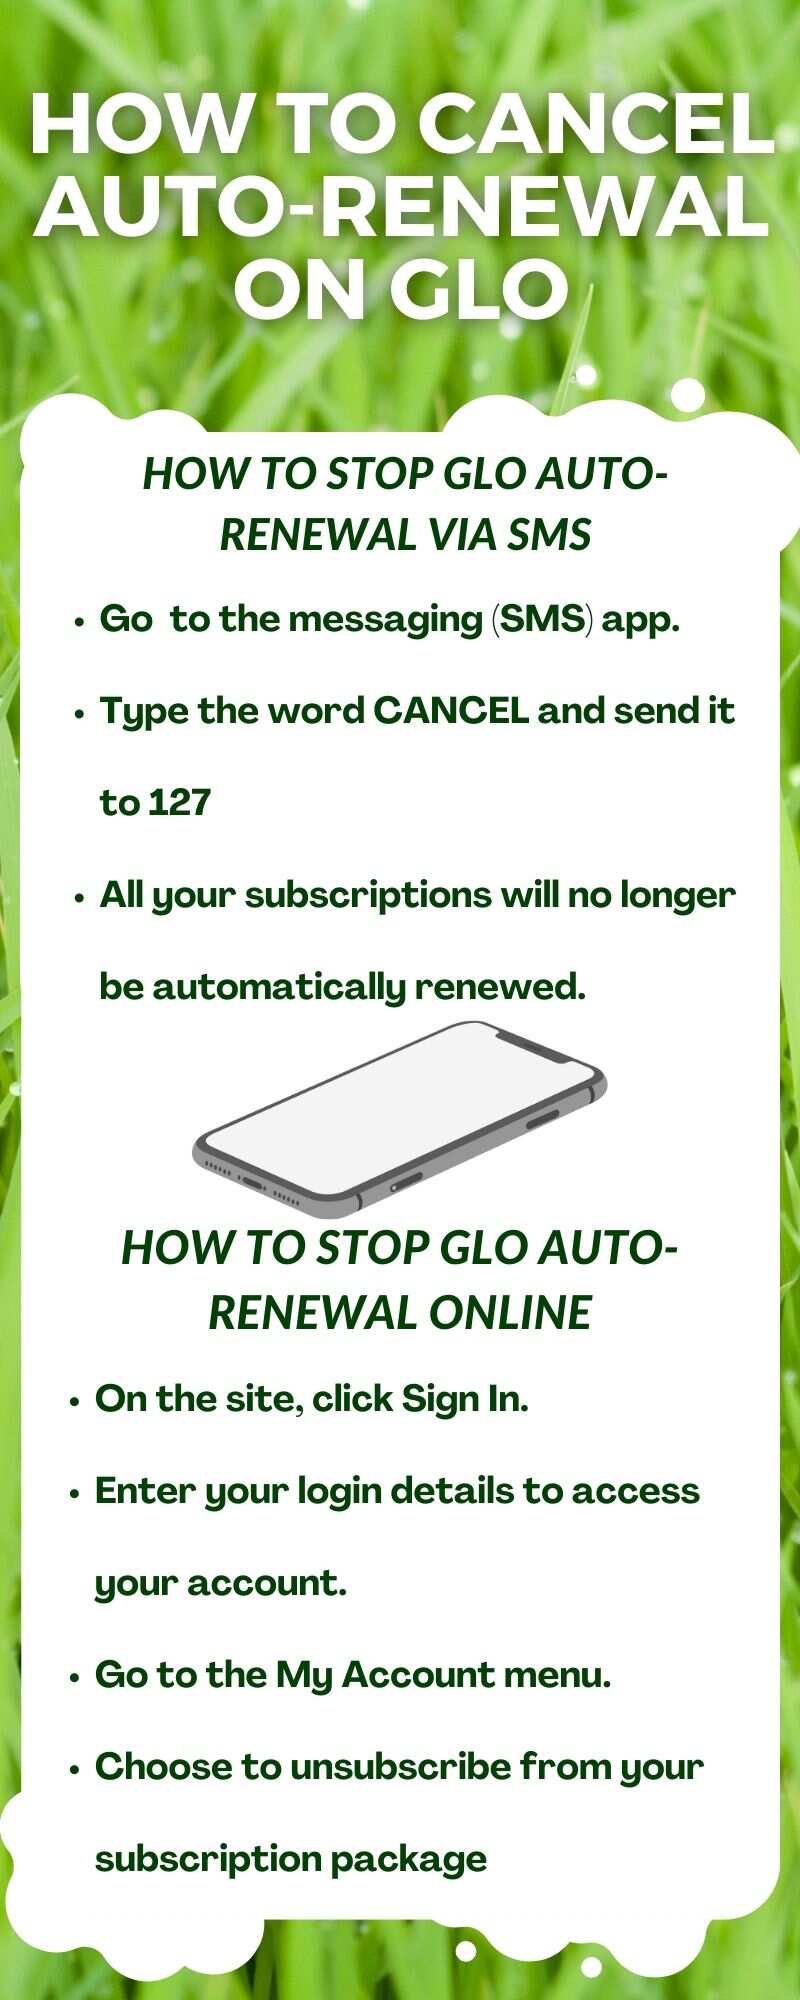 How to cancel auto-renewal on Glo